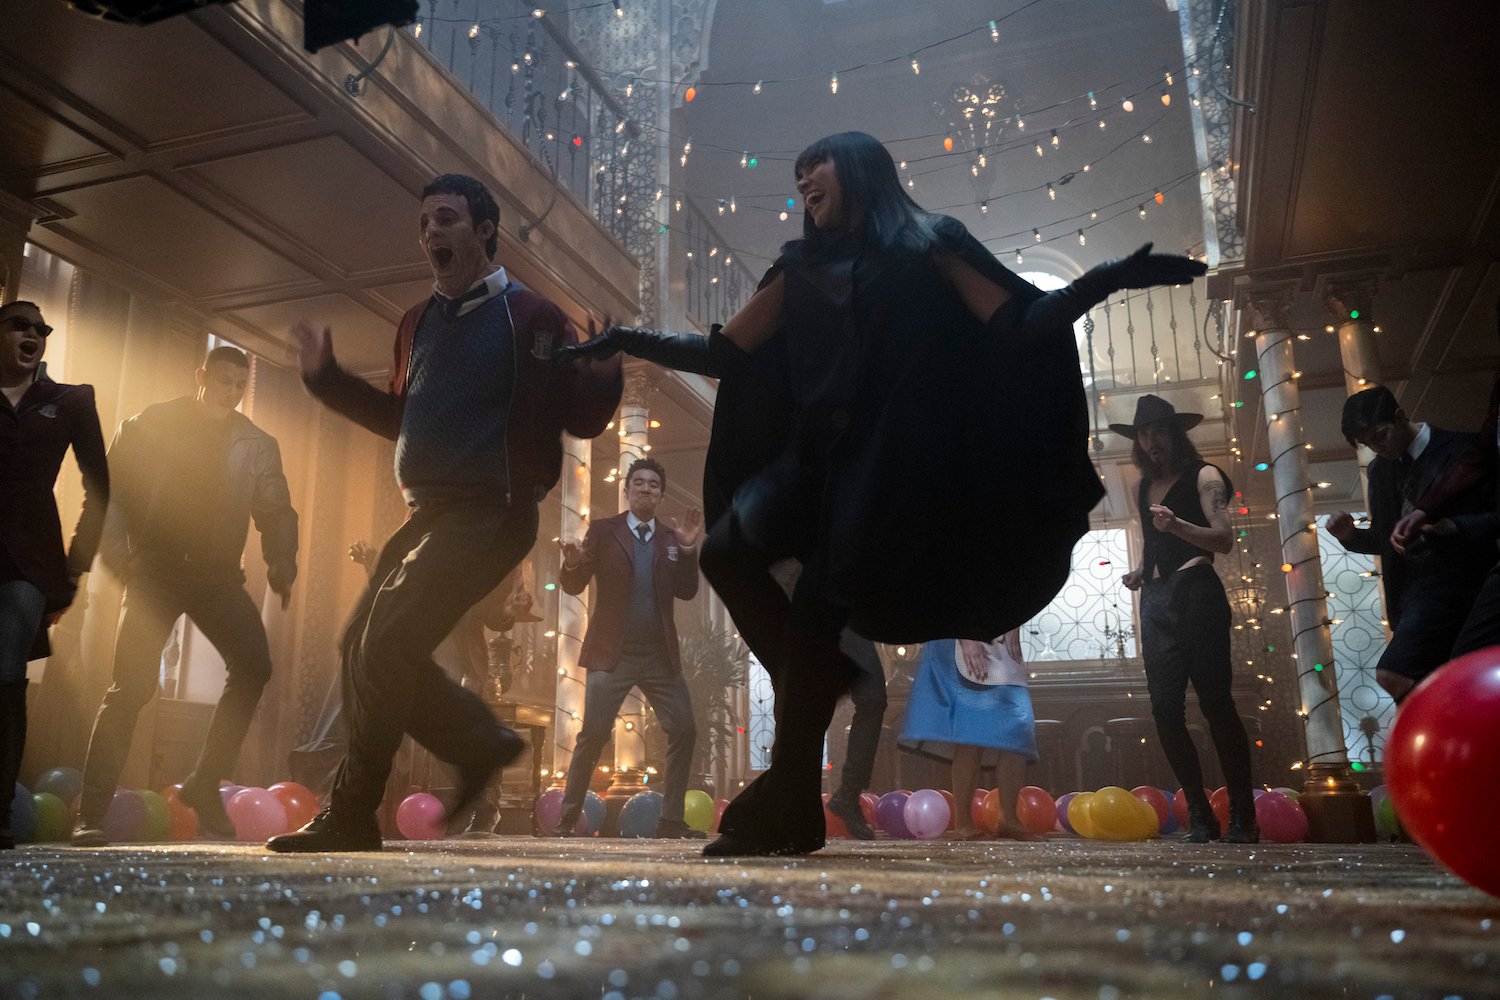 'The Umbrella Academy' Season 3 scene showing the group dancing to 'Footloose.' 'The Umbrella Academy' Season 4 looks to finish filming in May 2023.